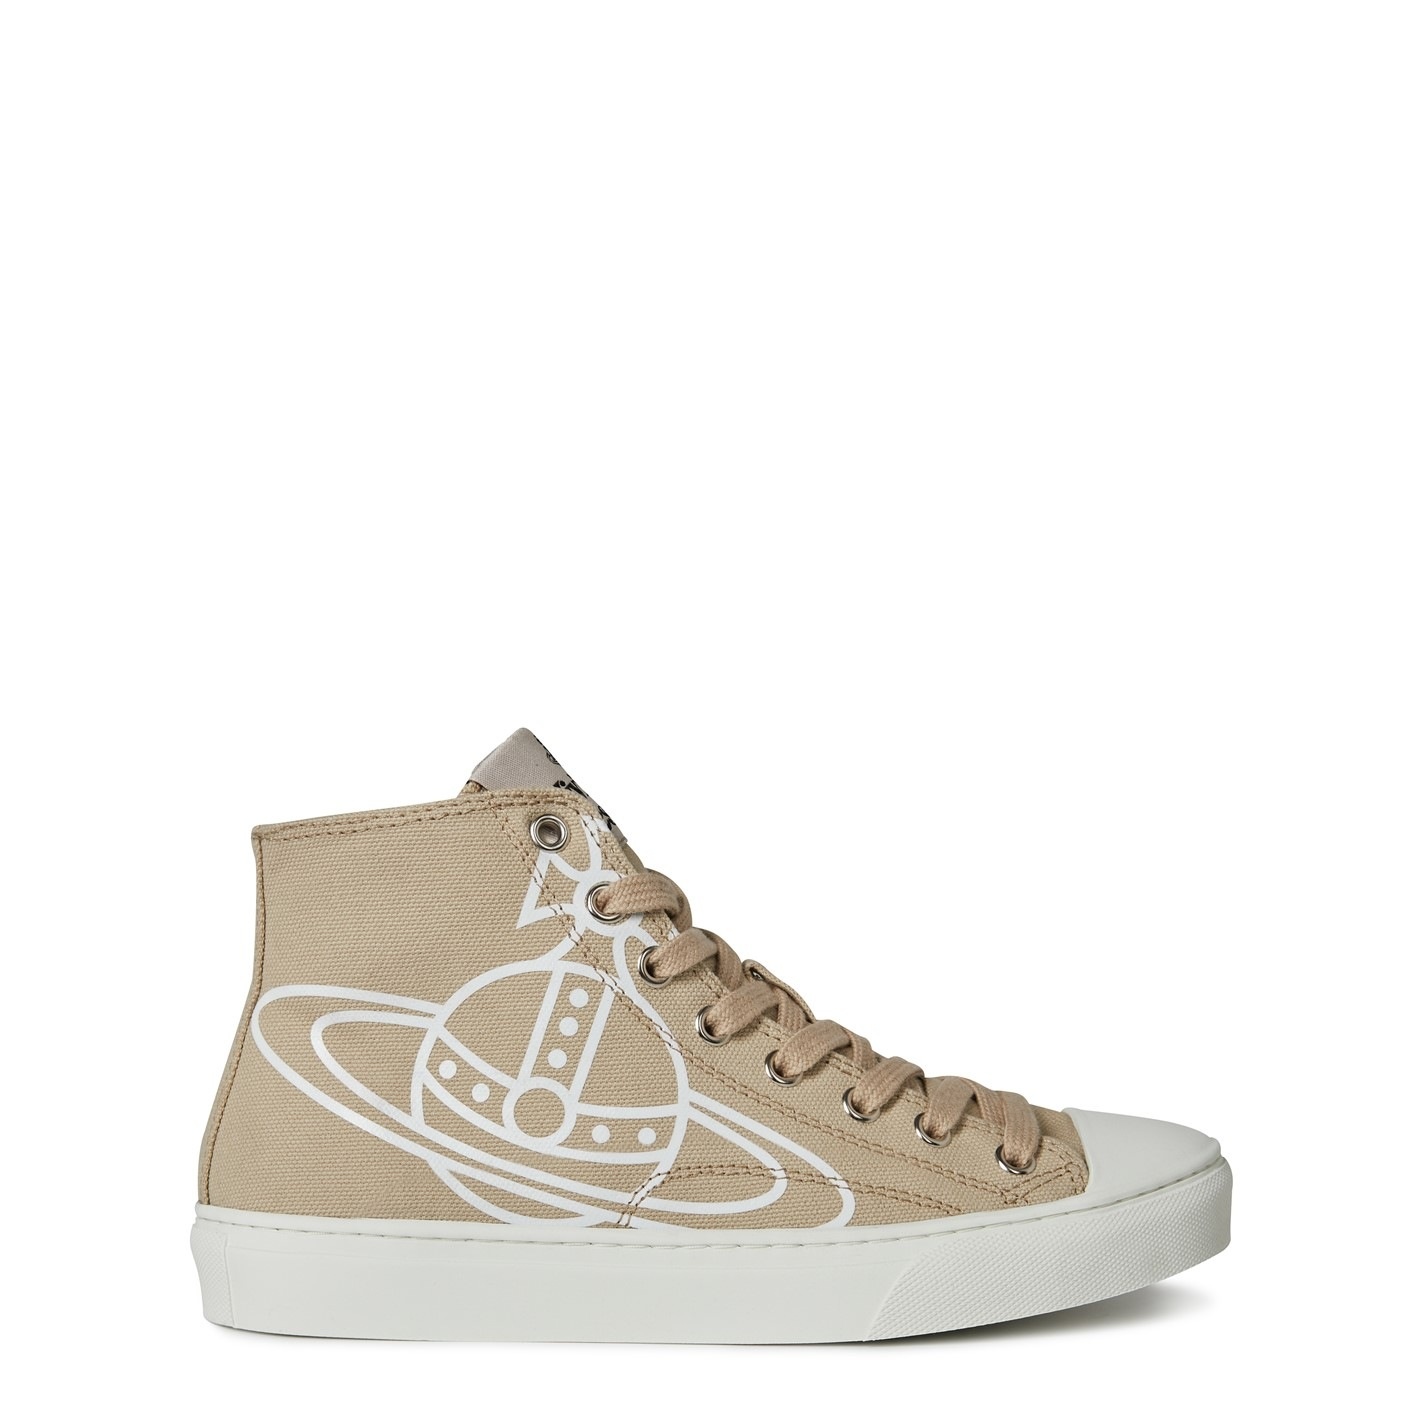 PLIMSOLL HIGH TOP TRAINERS - 1